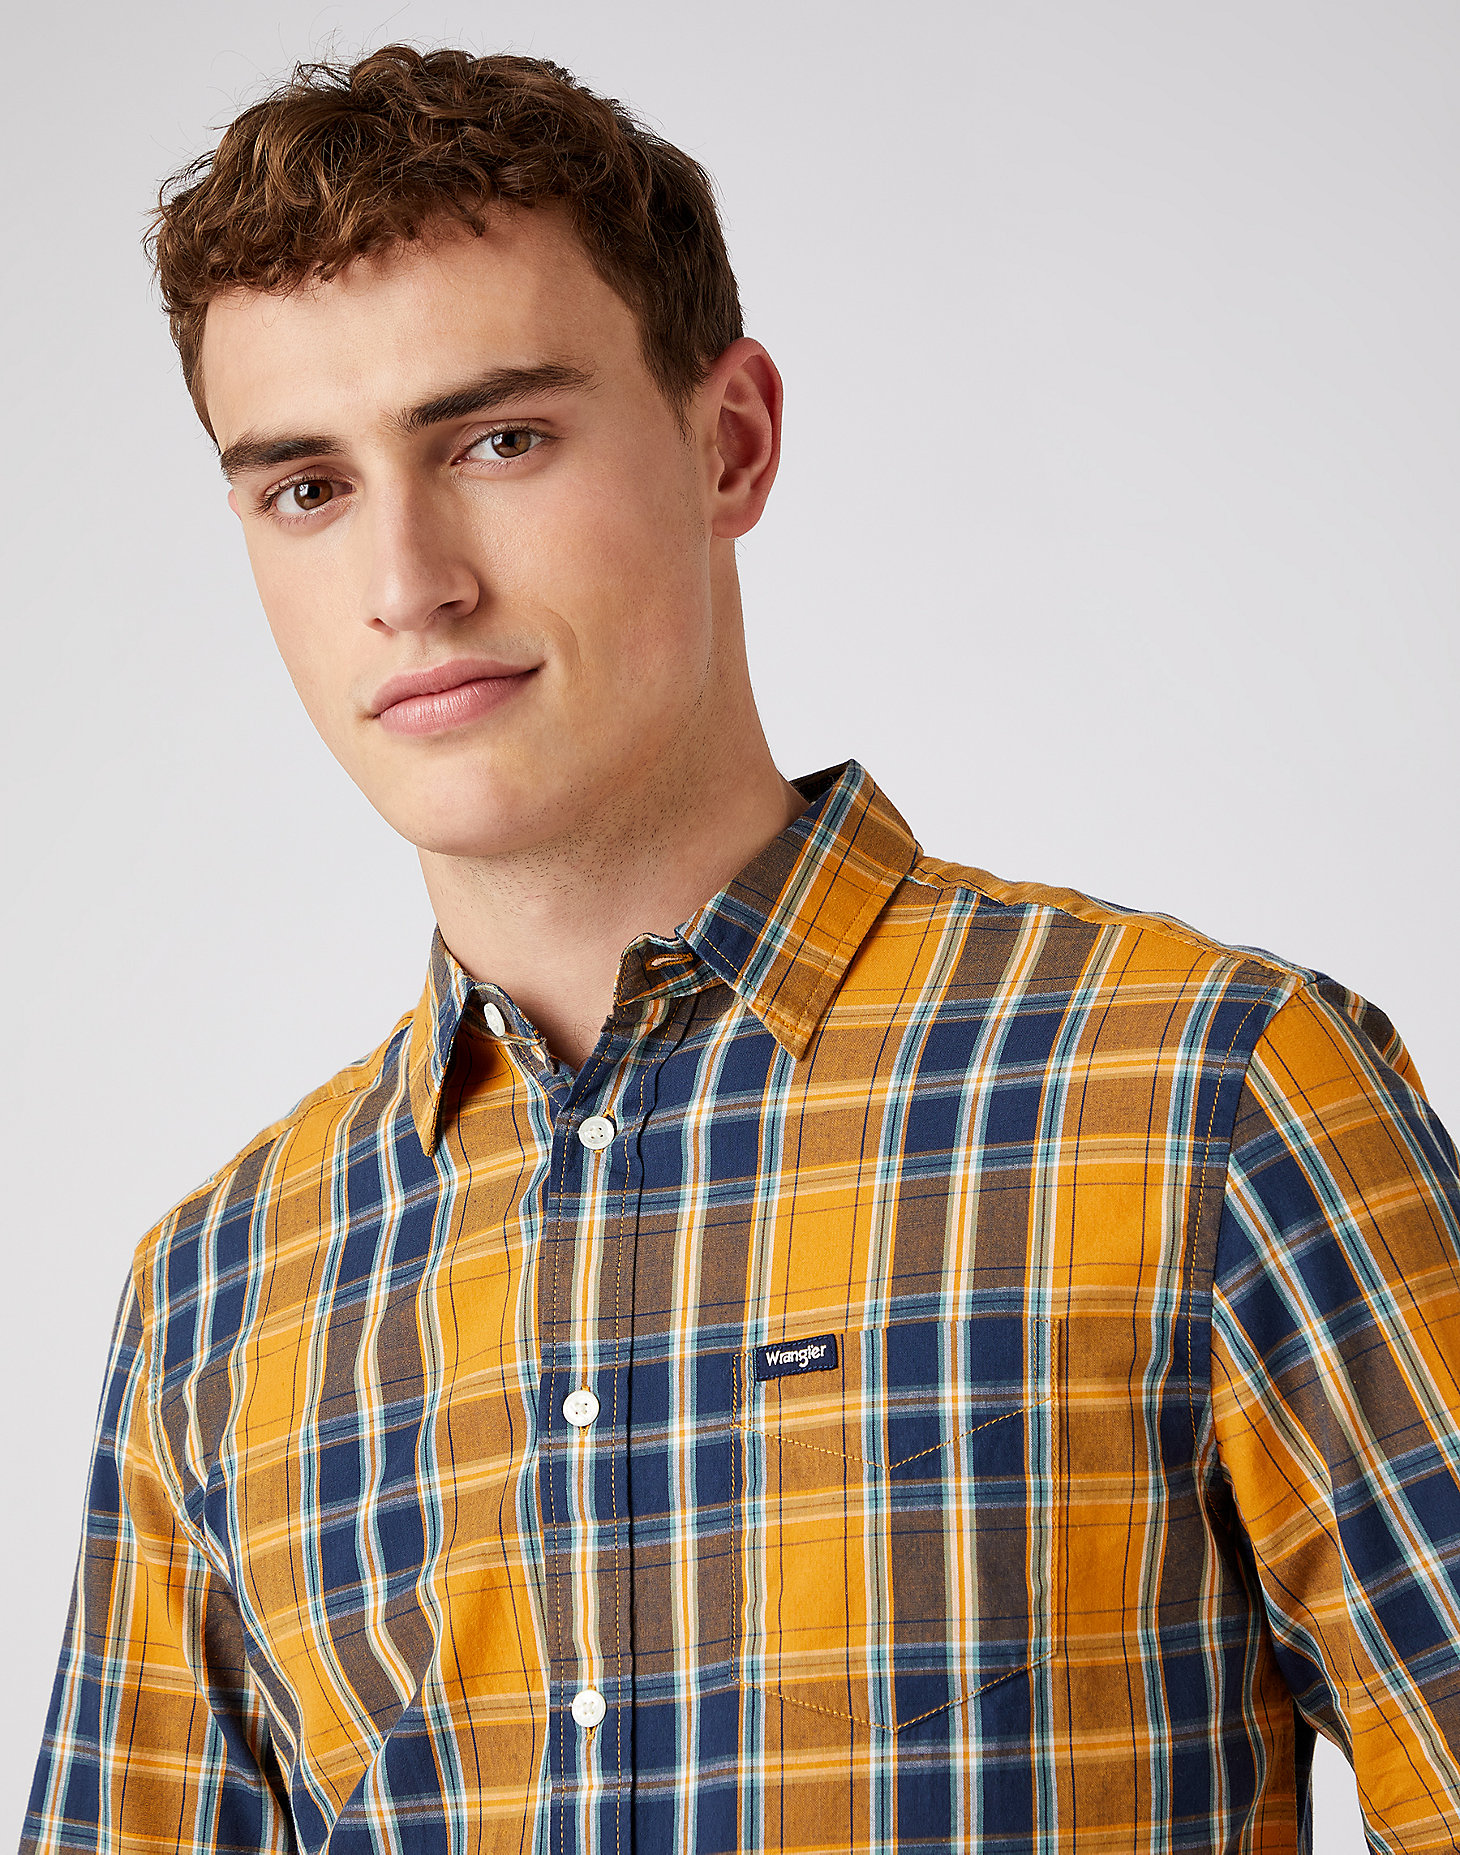 One Pocket Shirt in Inca Gold alternative view 3